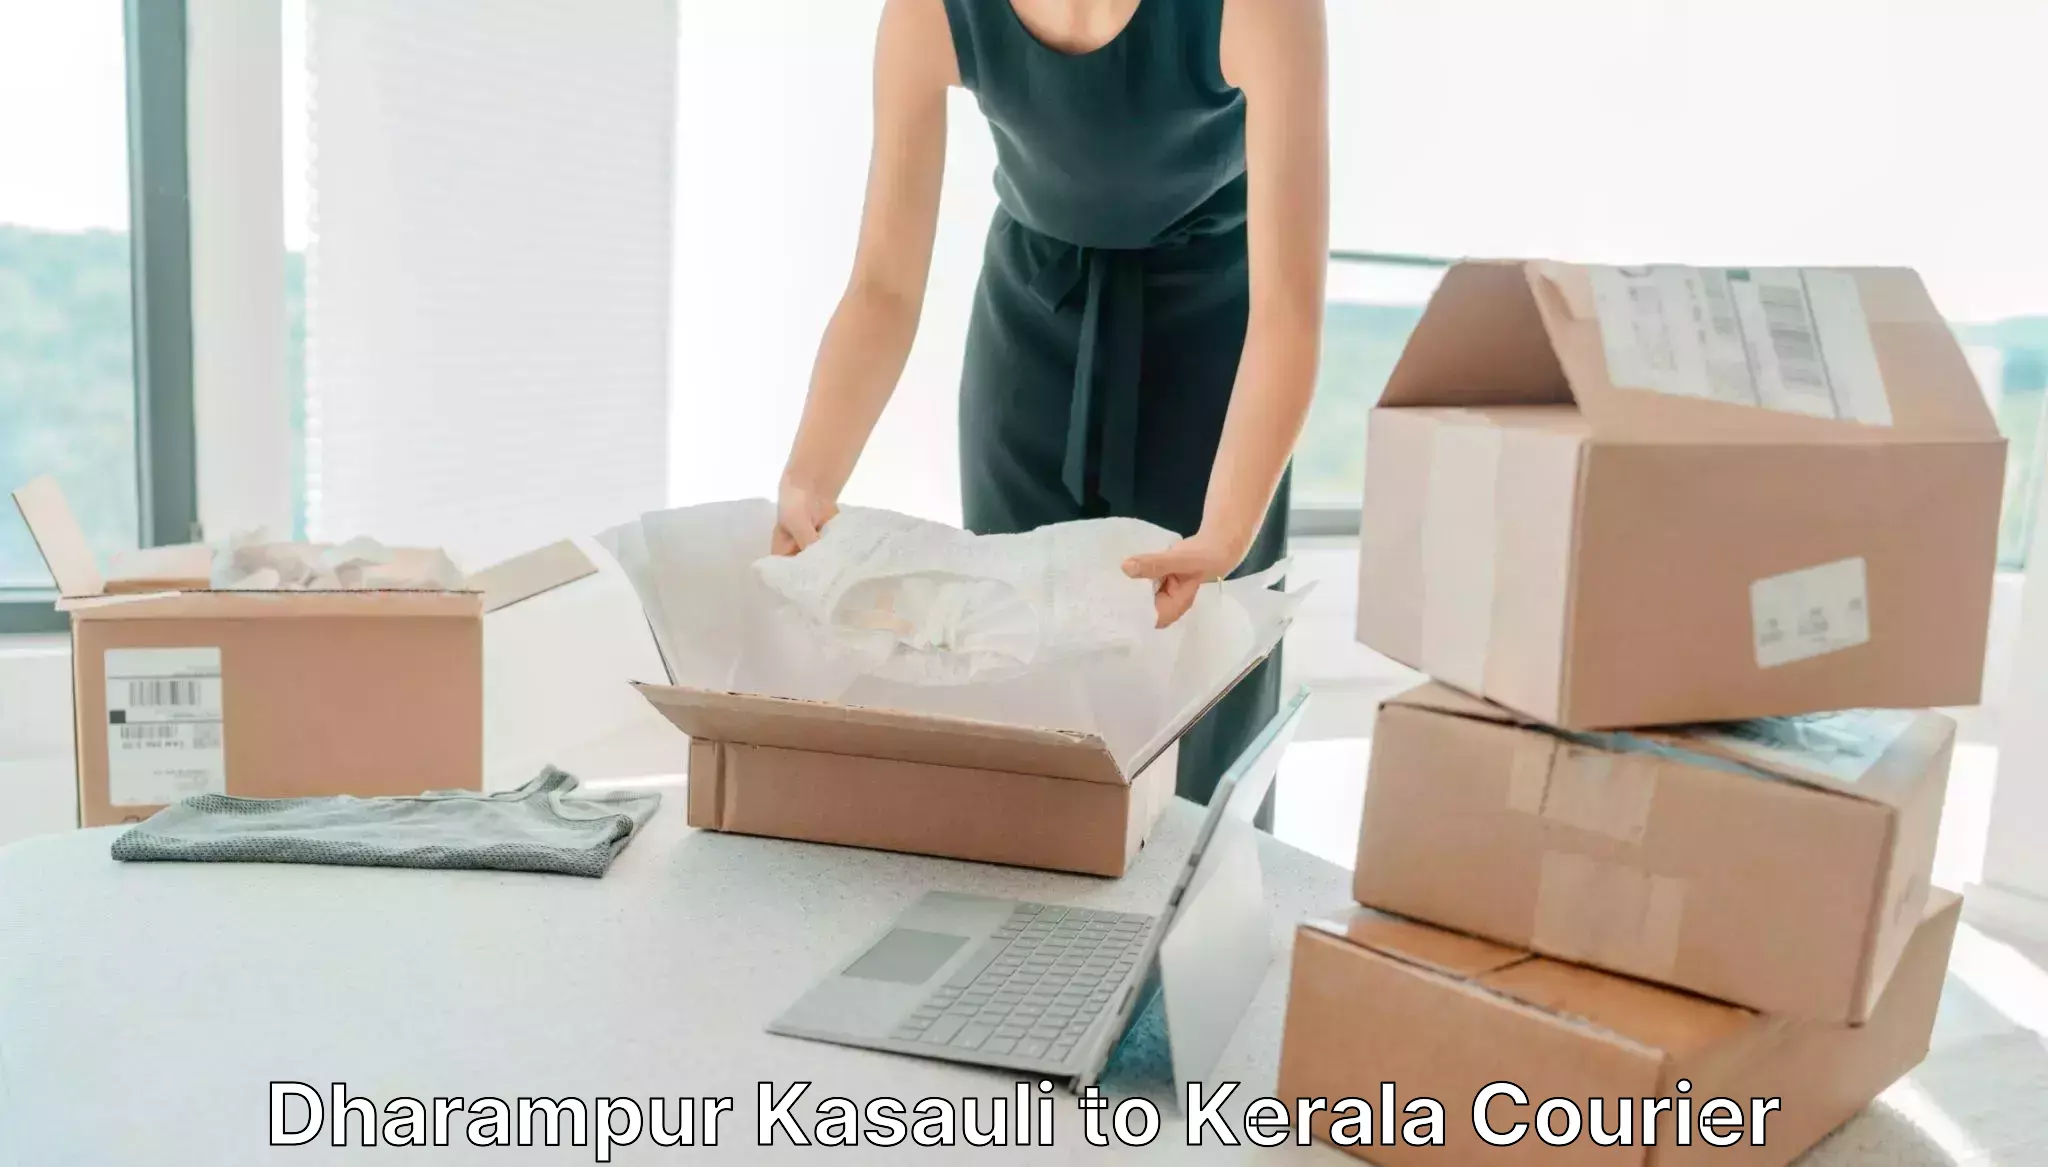 Nationwide parcel services Dharampur Kasauli to Kerala